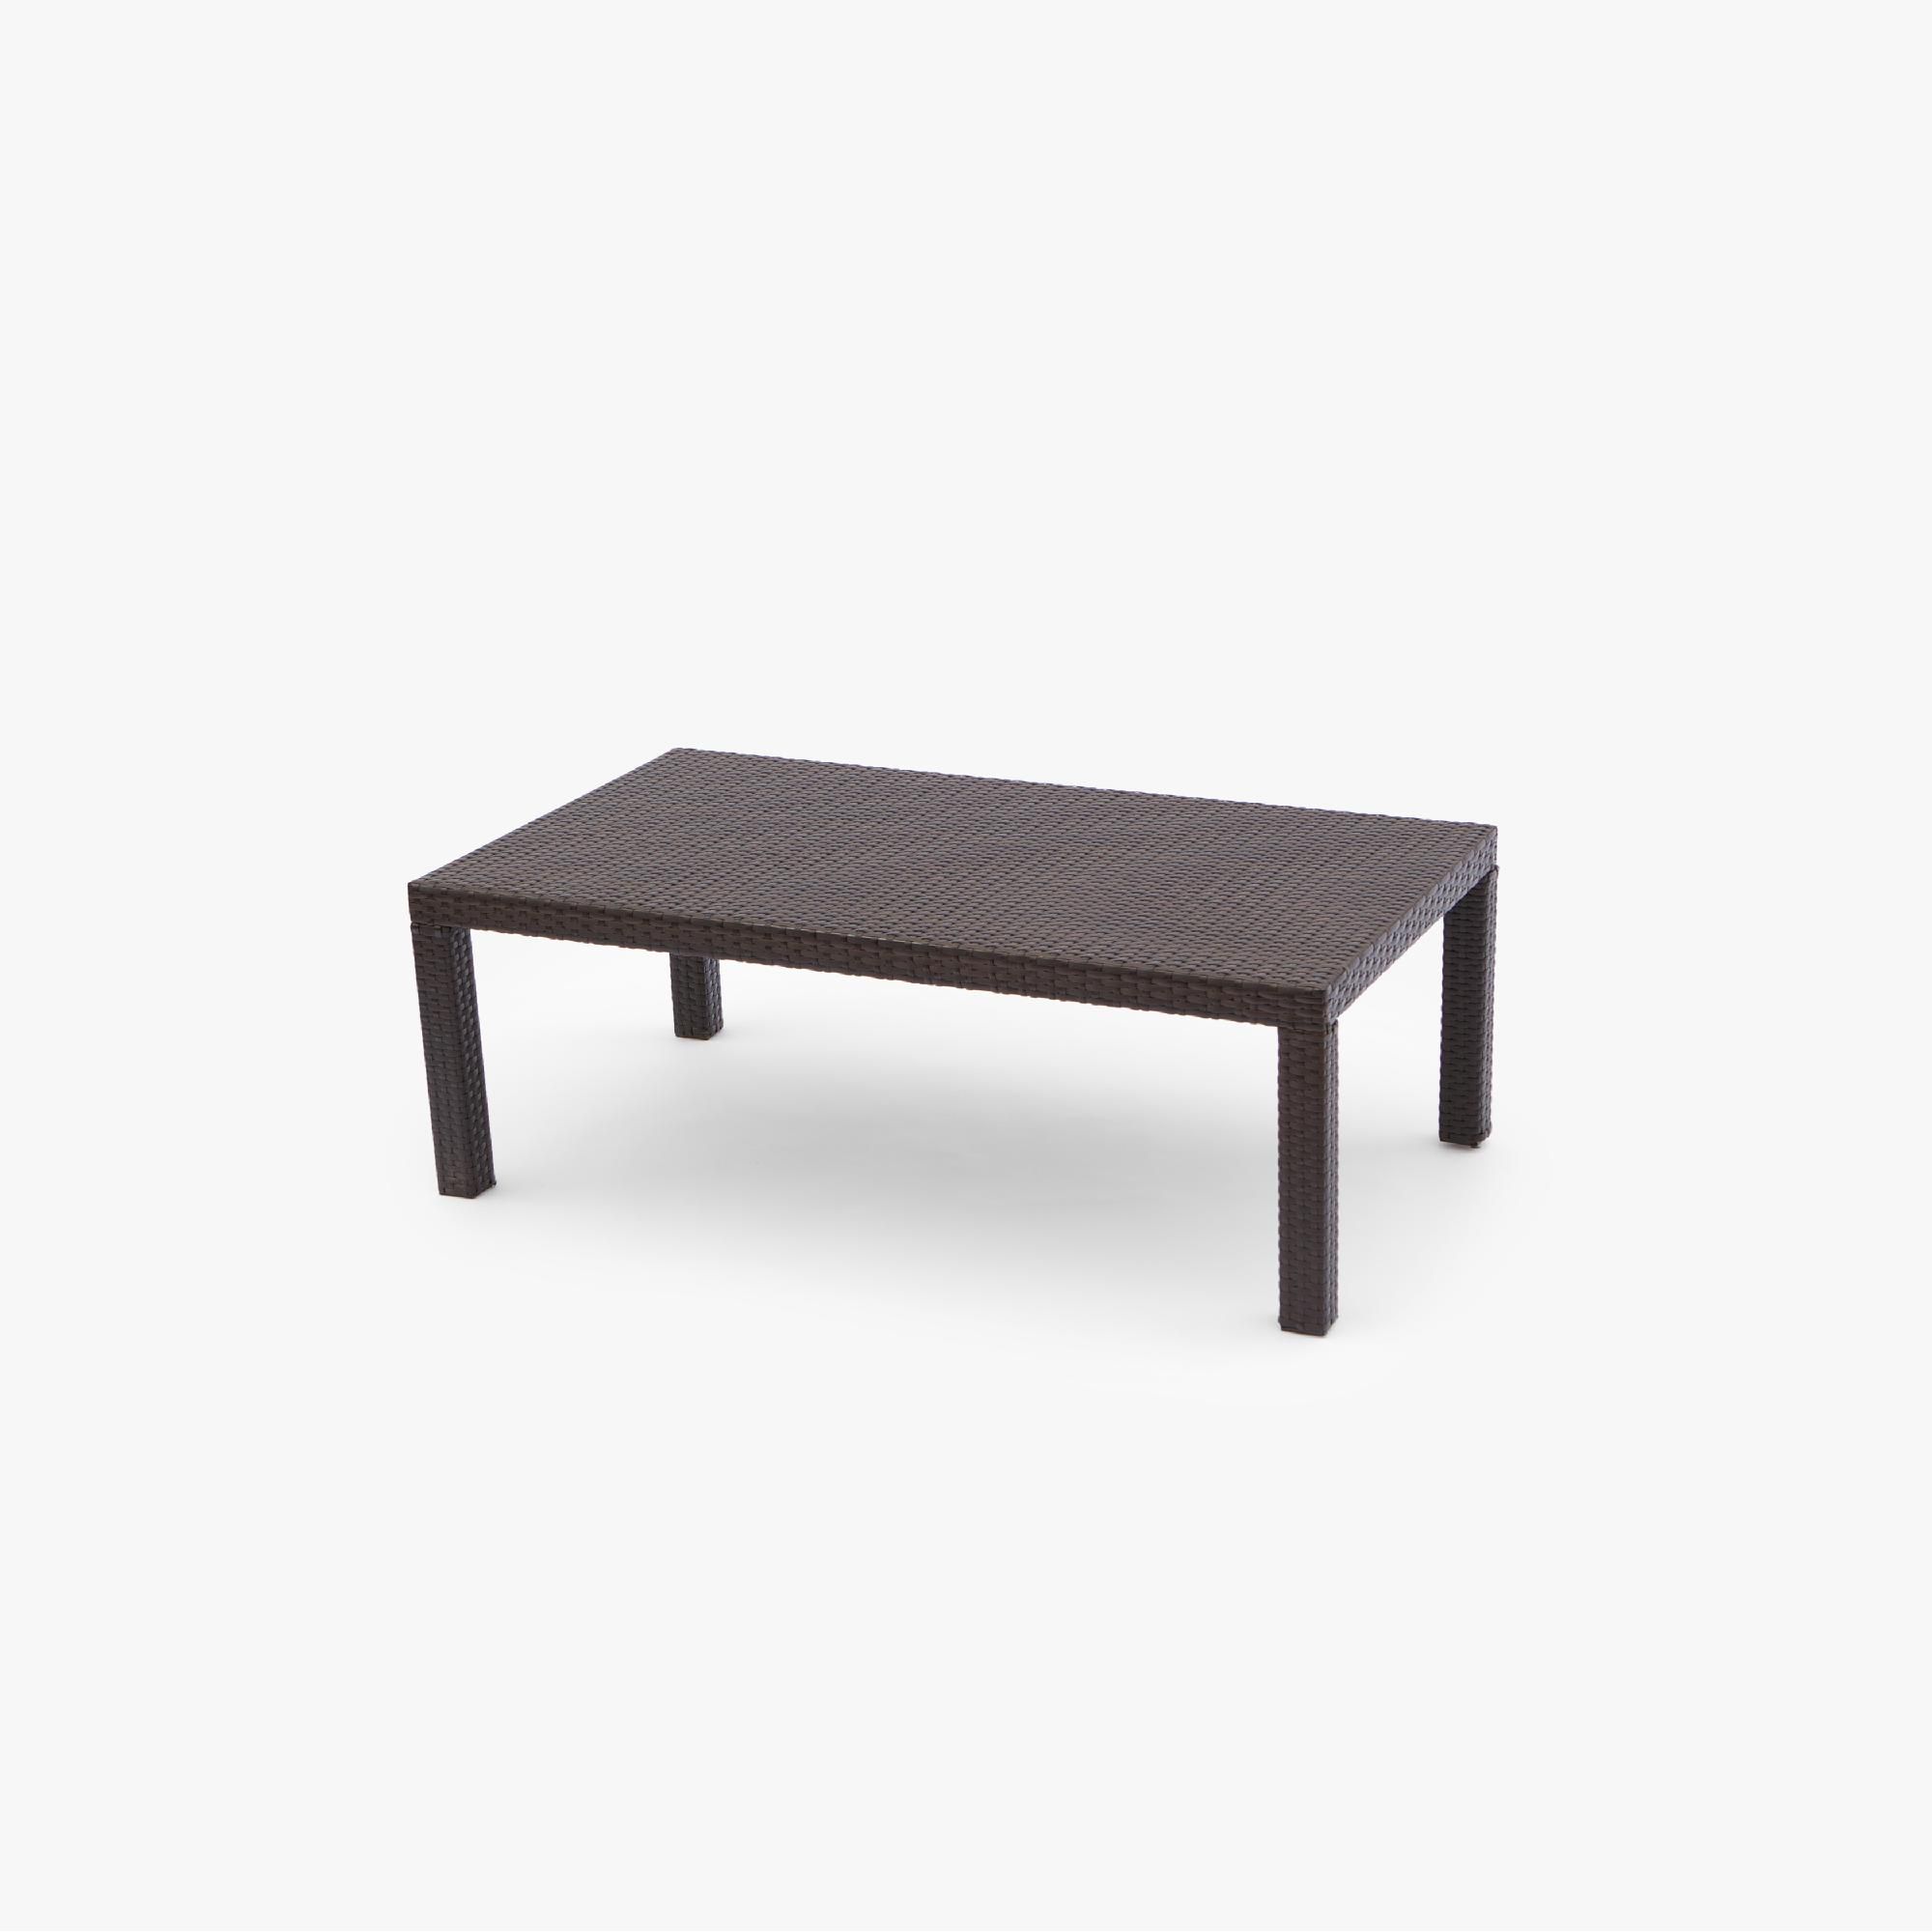 RST Brands Coffee Table 26" x 46" in Espresso Rattan